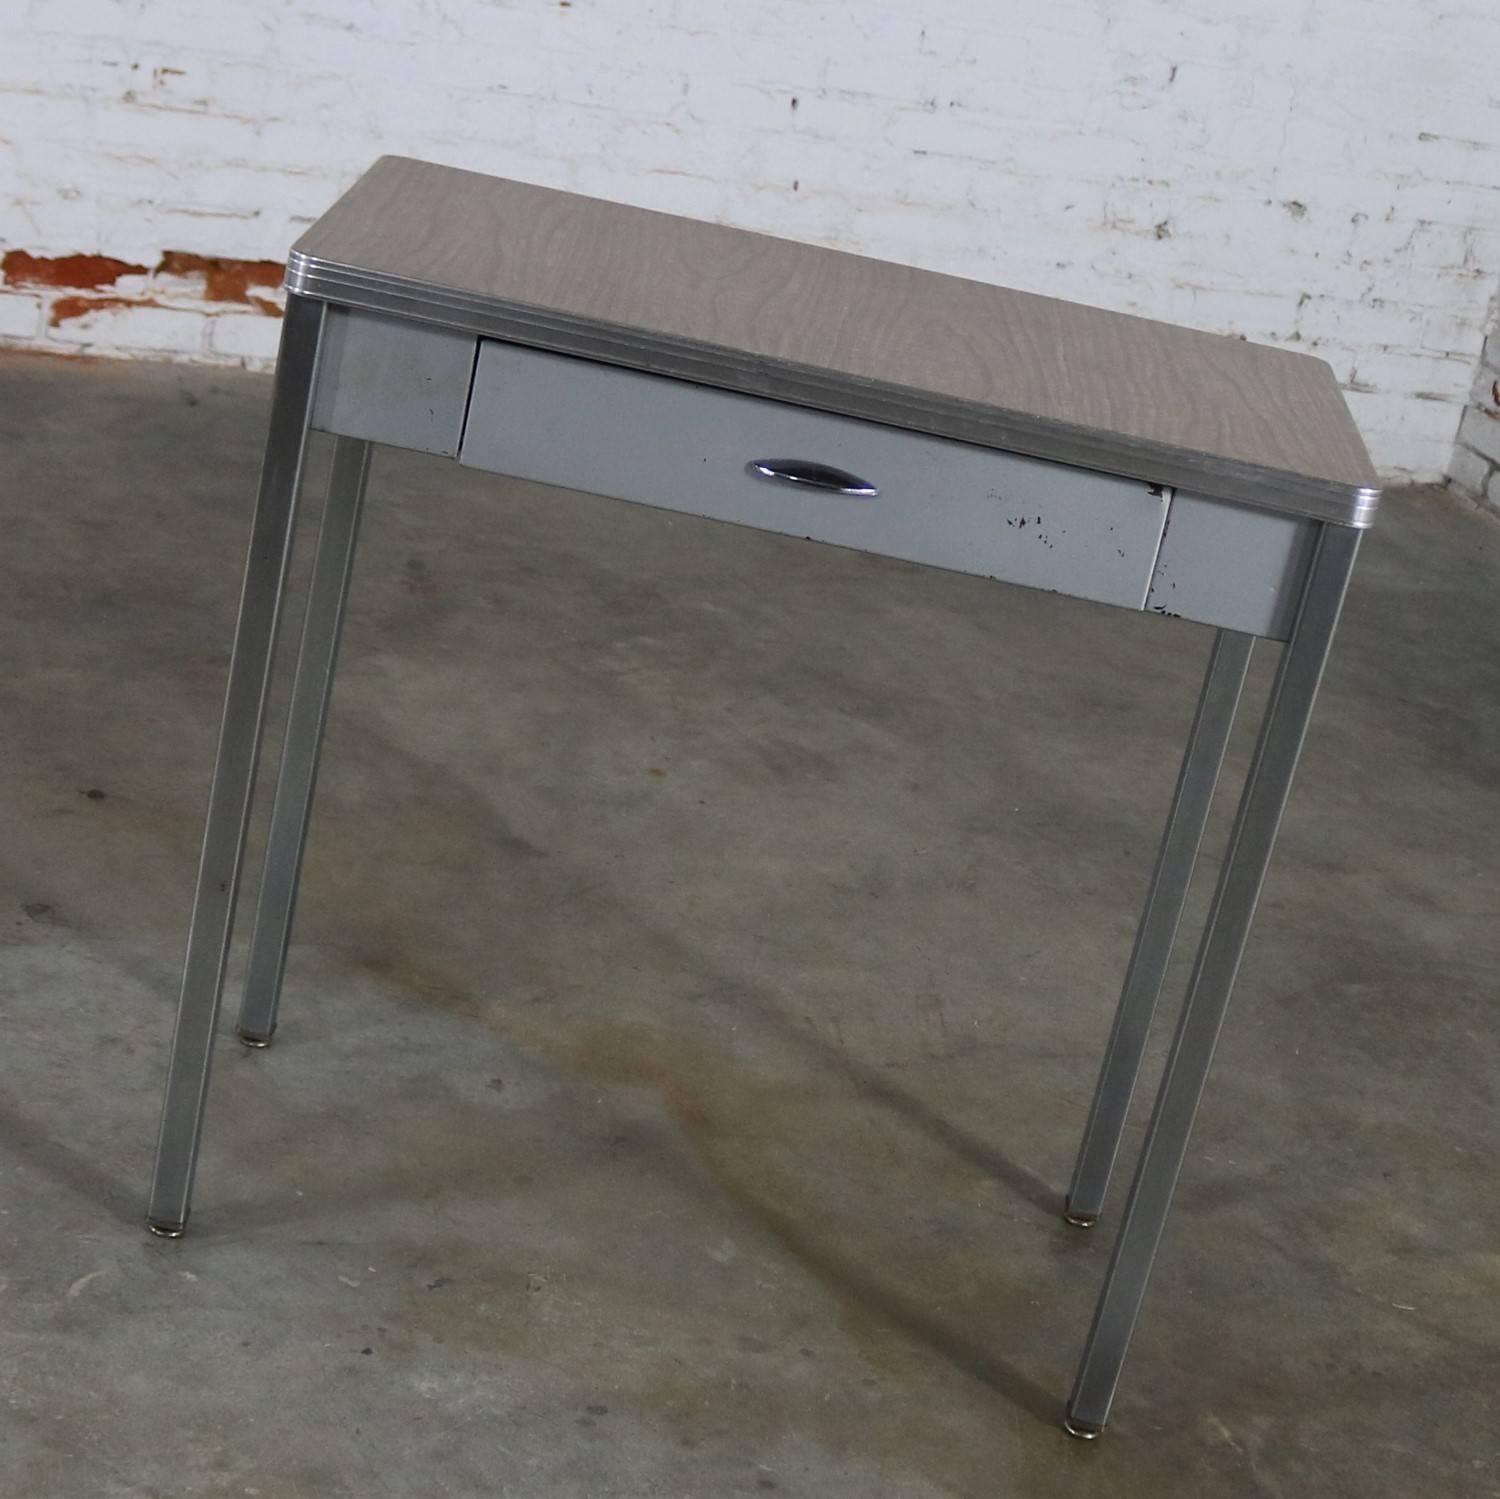 Handsome Art Deco, Machine Age, streamline moderne, or art moderne hall table or small desk by Royal Metal Manufacturing. This piece is in wonderful vintage condition but not without normal nicks and dings you would expect for its age to the